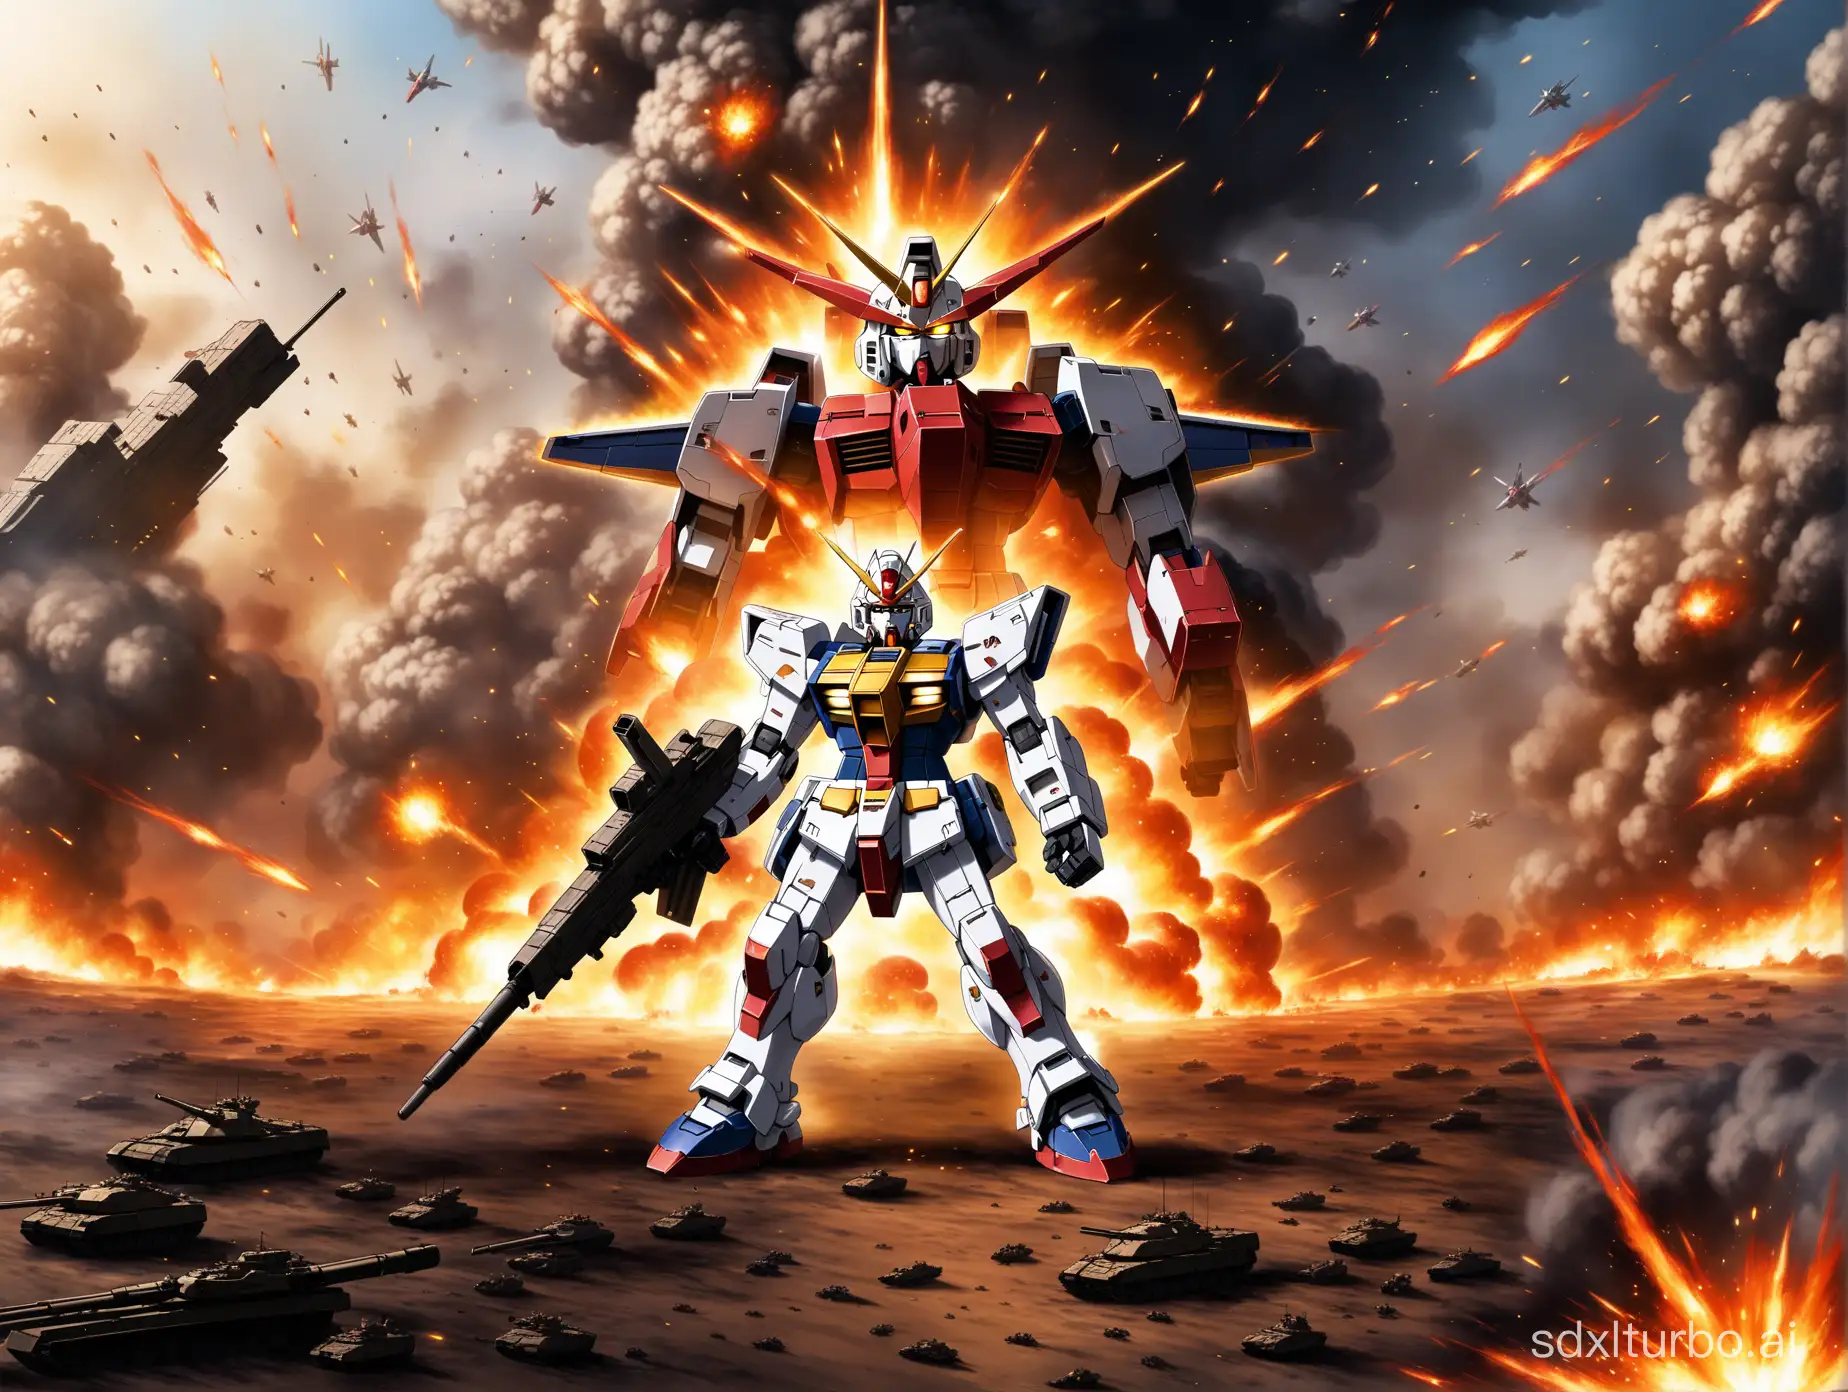 The Gundam with a severed arm kneels on the ground, behind it is a battlefield ablaze with war and explosions.